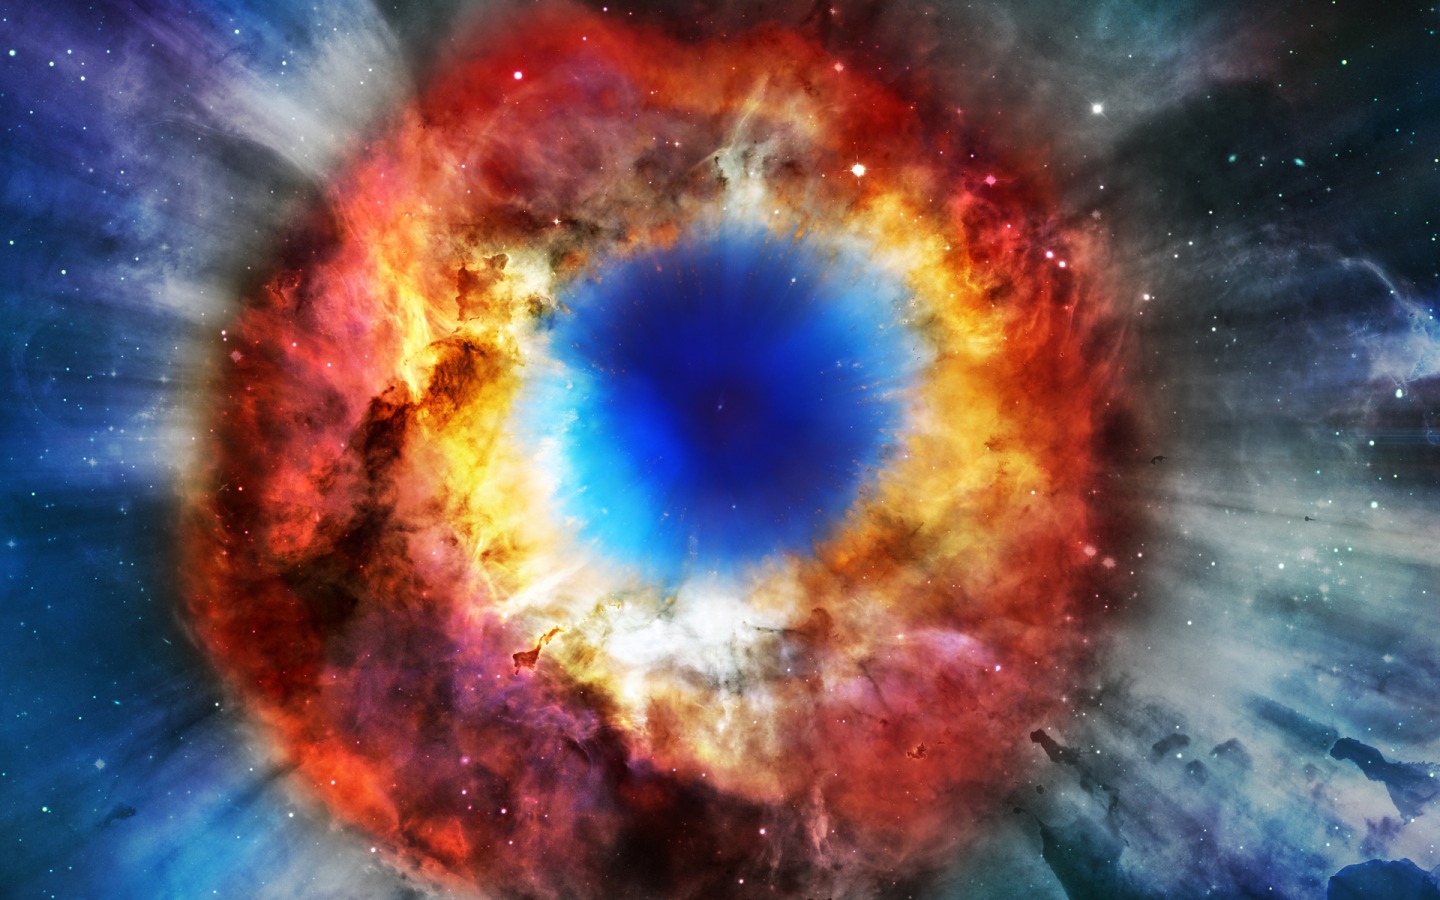 Helix Nebula Wallpaper Space Nature Wallpapers in jpg format for free